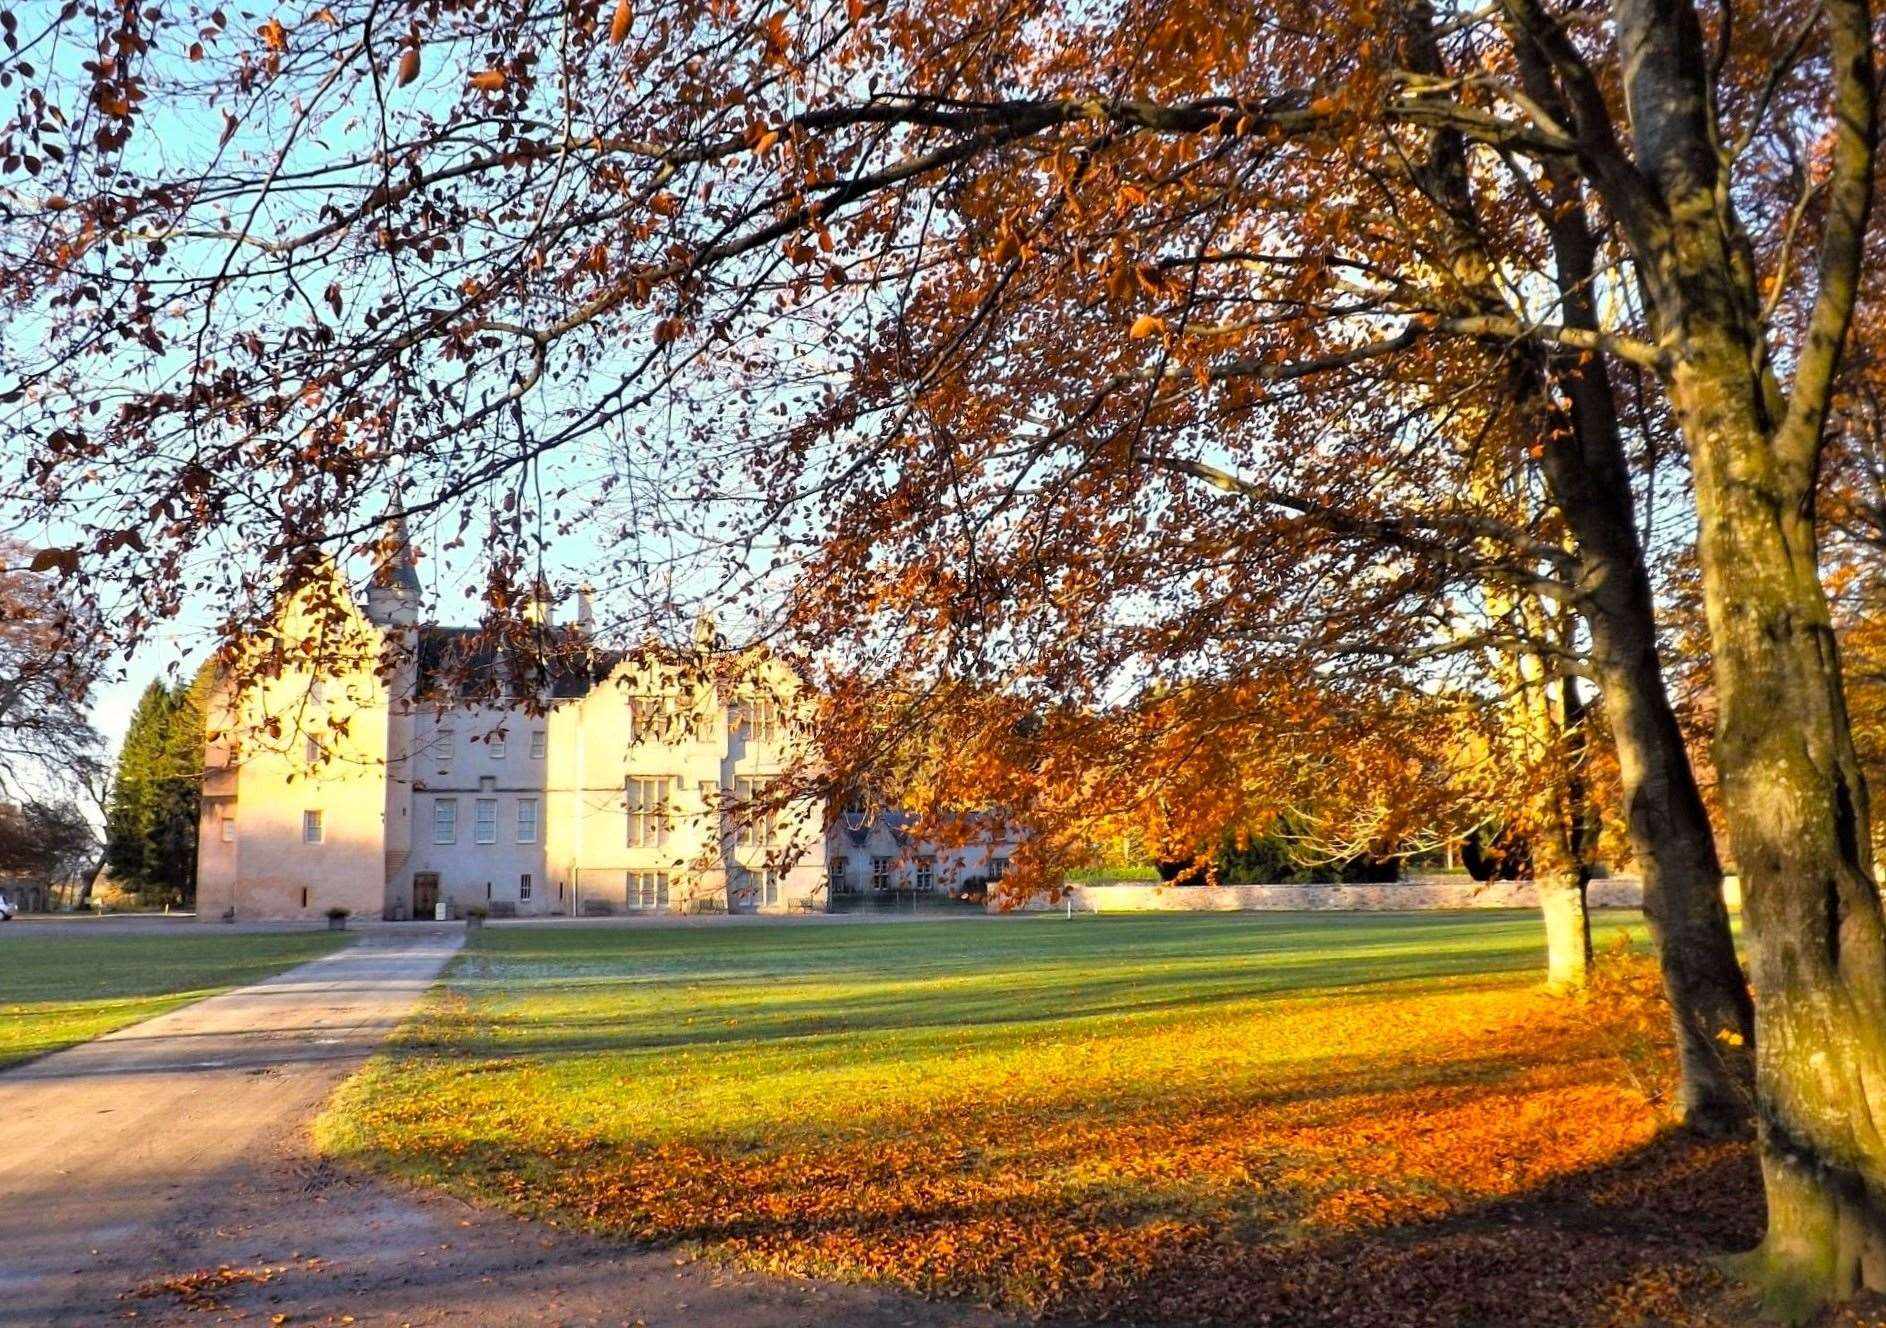 Brodie Castle in the low autumn sun. Pictuire: Harry Payne